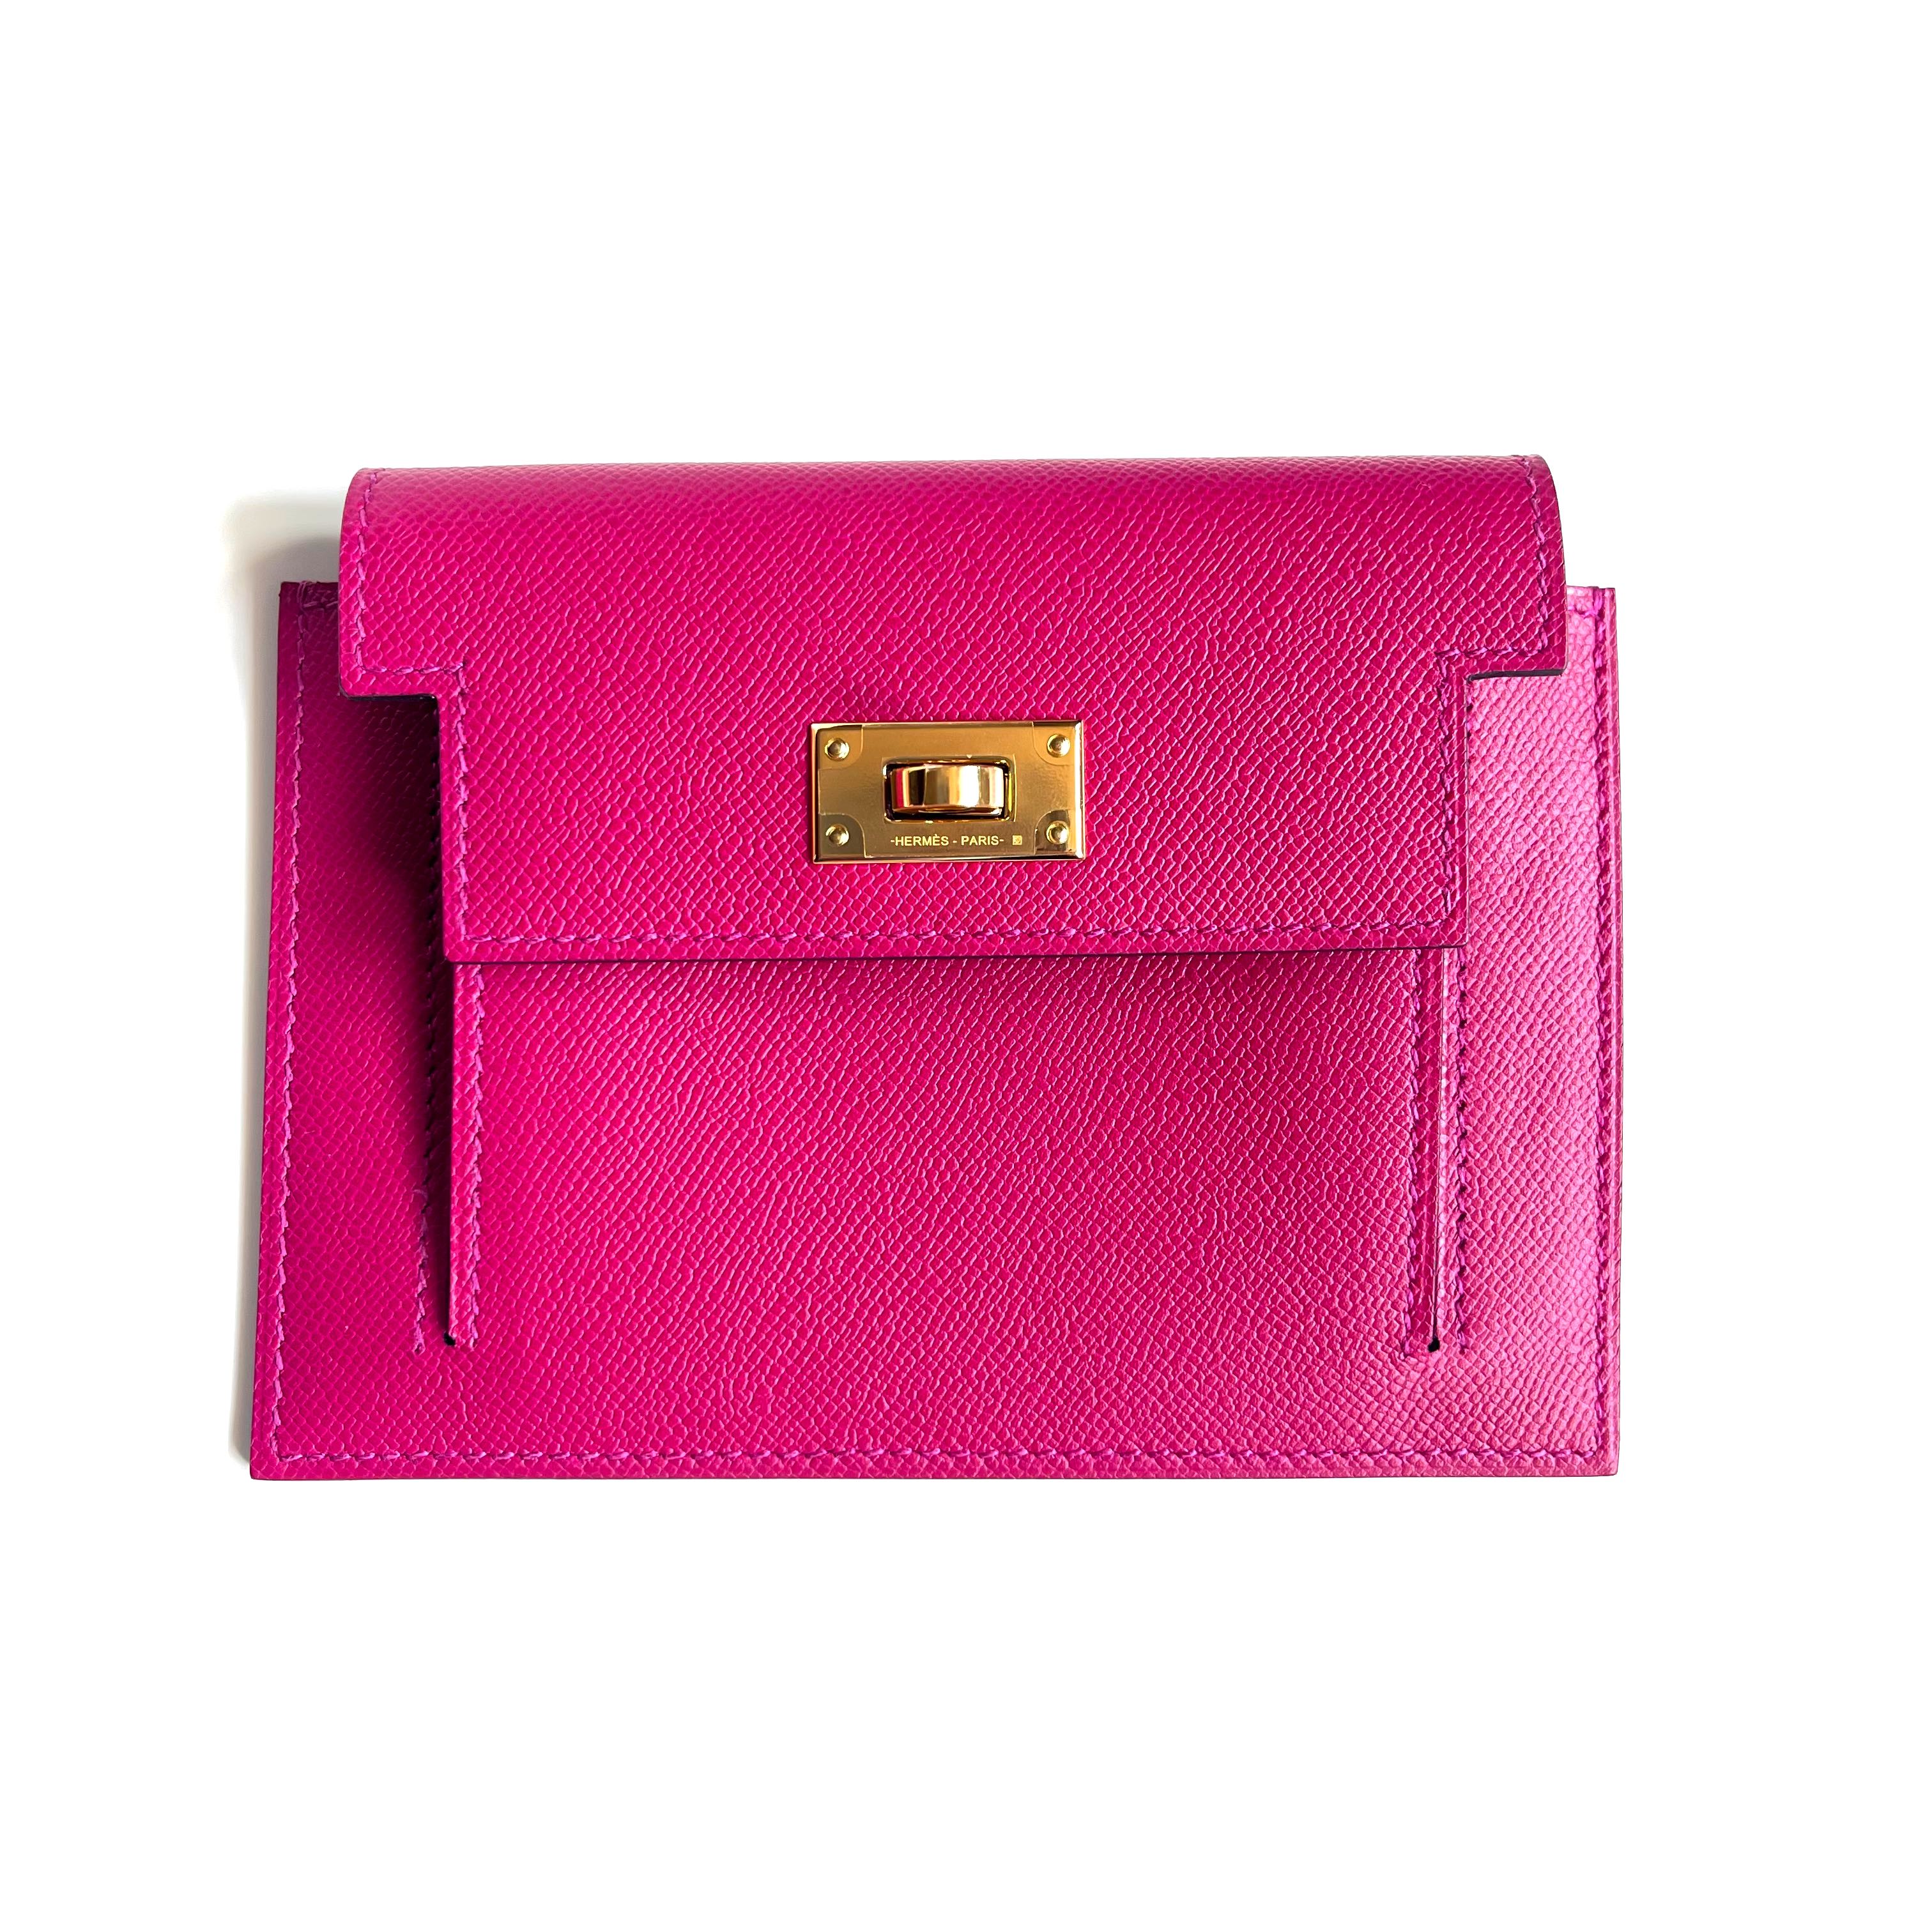 Hermes - Rose Poupre Kelly Pocket Compact in Veau Epsom with GHW ...